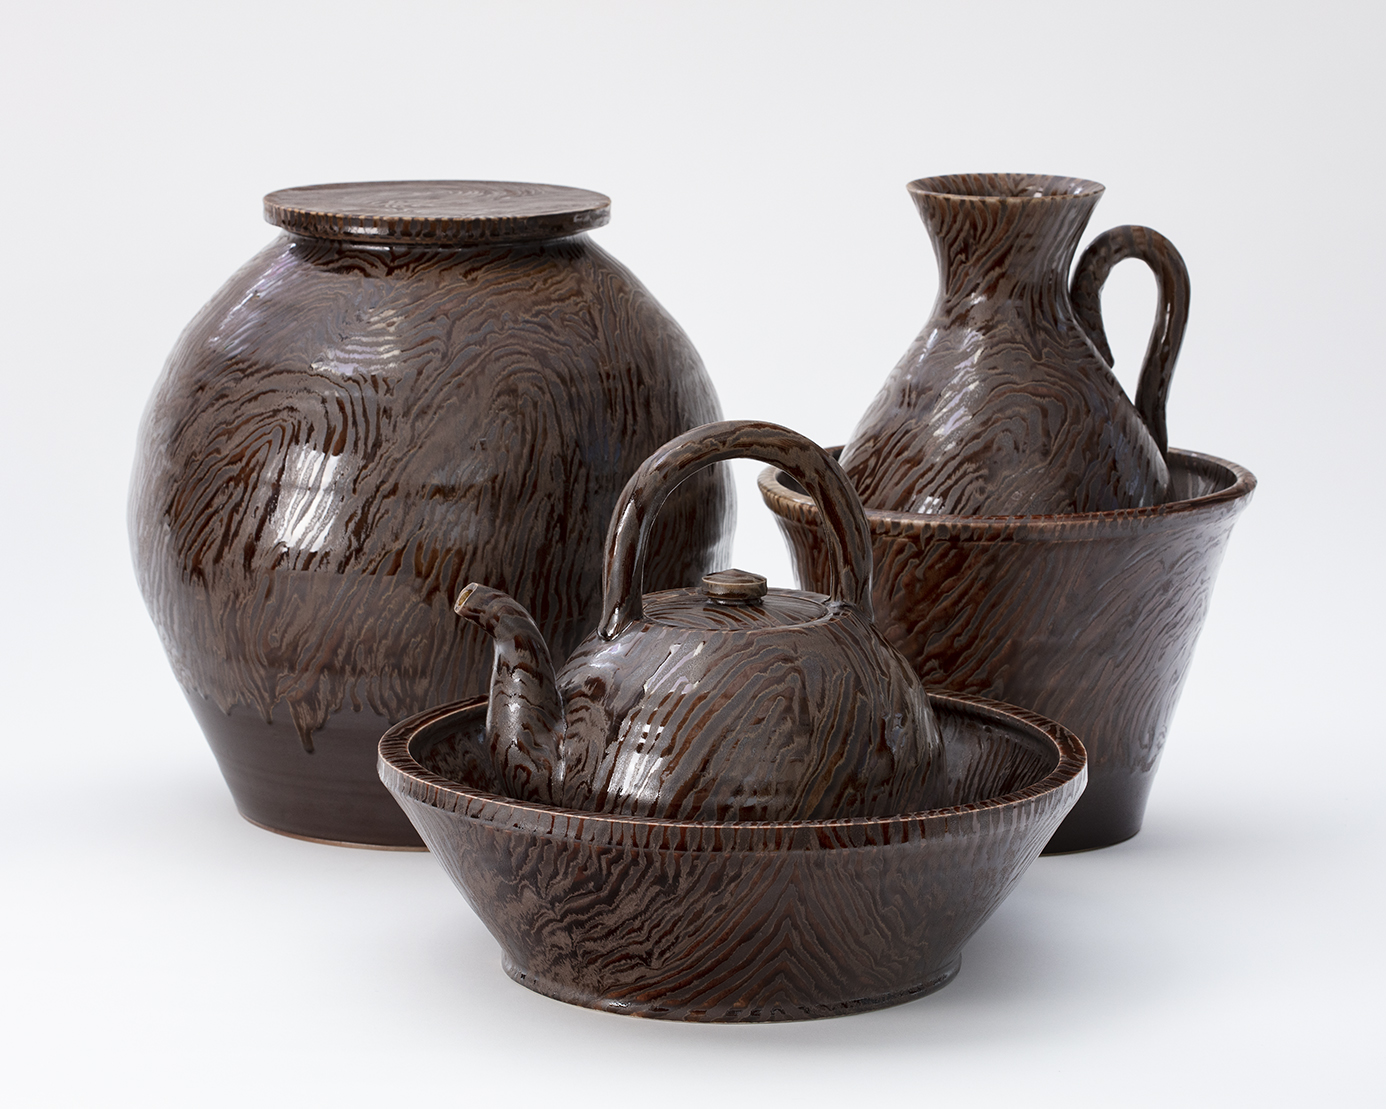 Linda Sikora, 'Faux Wood Group'. 2014-2018, stoneware, polychrome glaze, group footprint 12" x 3' x 2', Individual works: 5"-12" in height. Collection of the Smithsonian American Art Museum, 2021. John Polak Photography - group photo with large jar with flat lid, teapot within a wide basin, and handled pitchers within a taller and more narrow basin/bowl